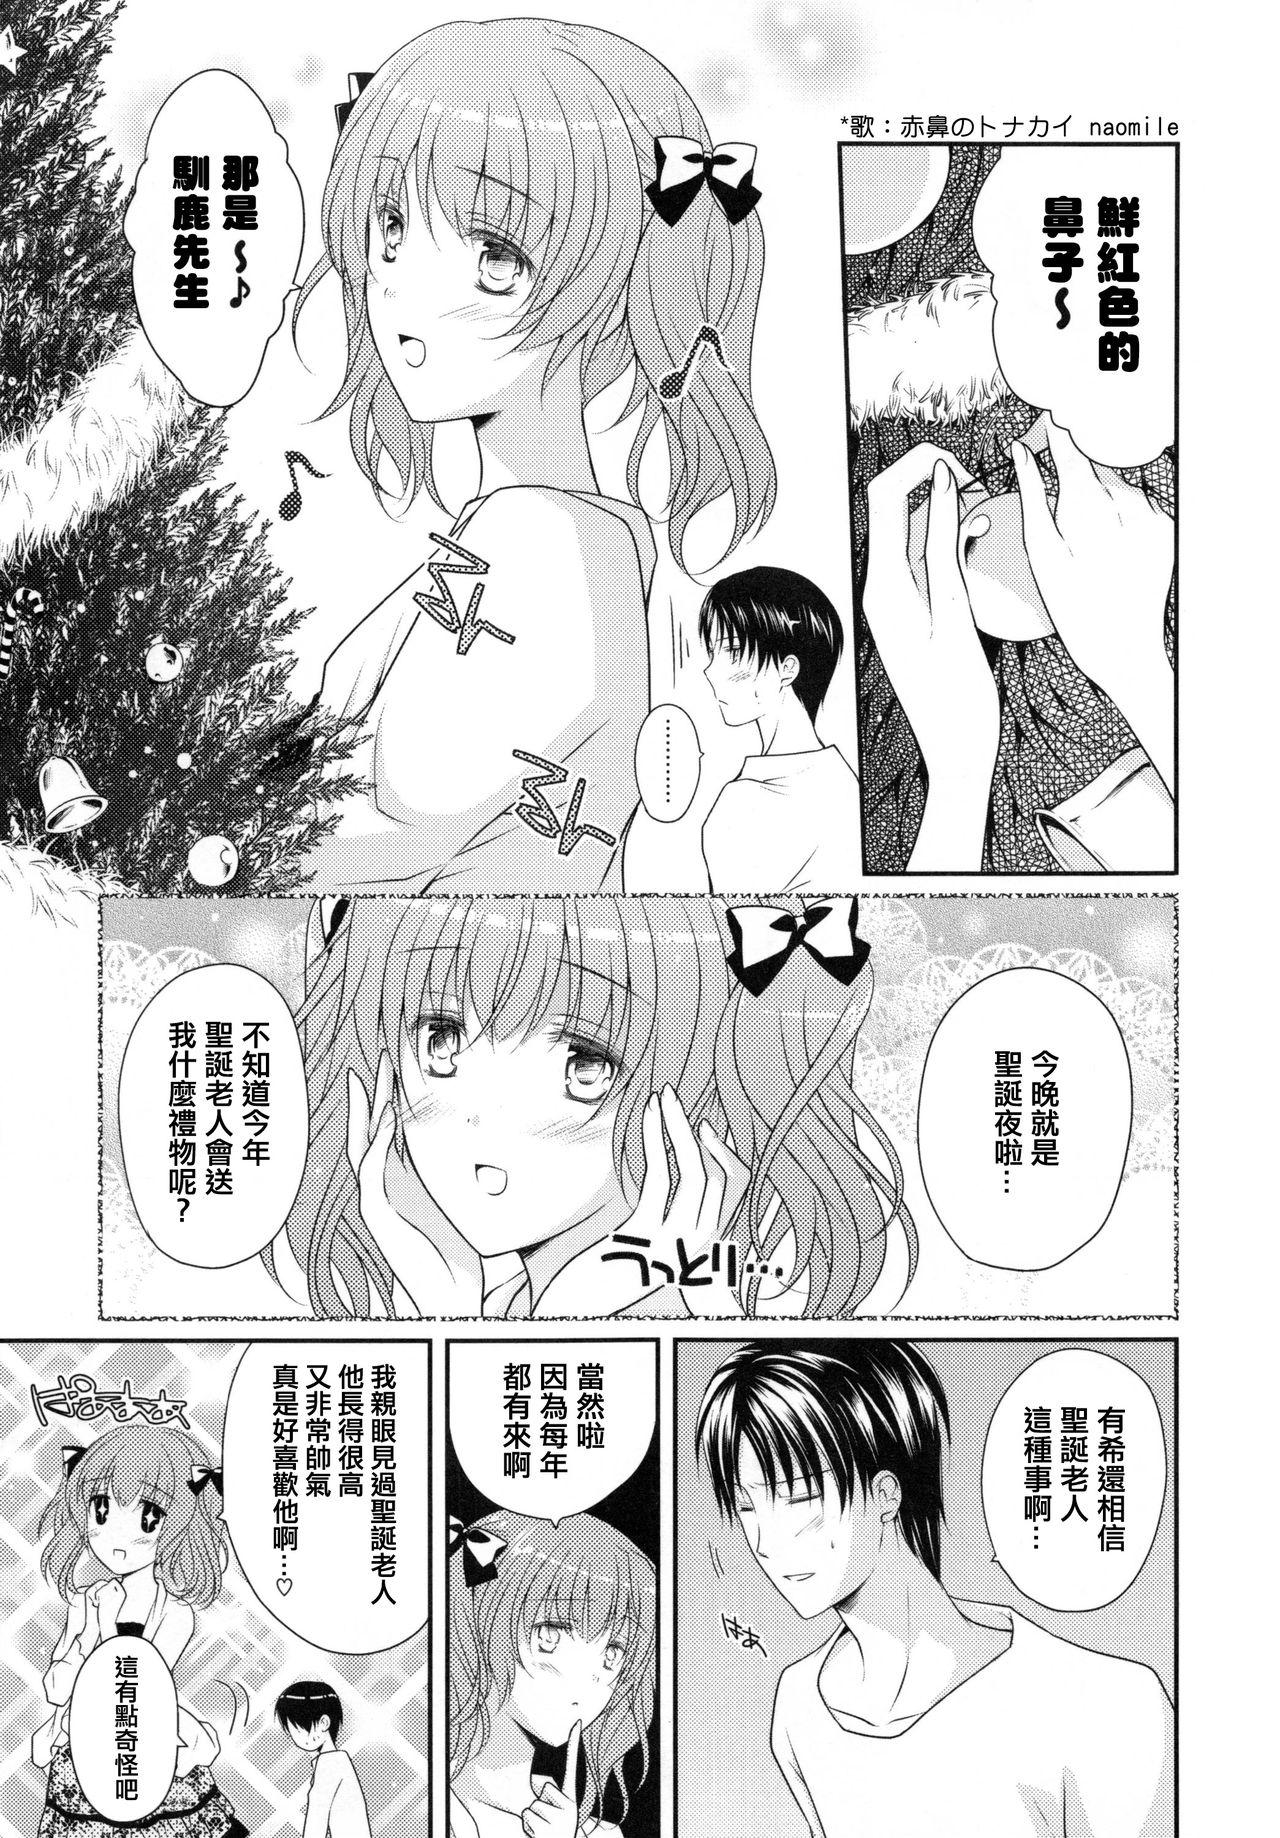 Wet Cunt 私のサンタさん♥ Best Blowjob Ever - Page 5